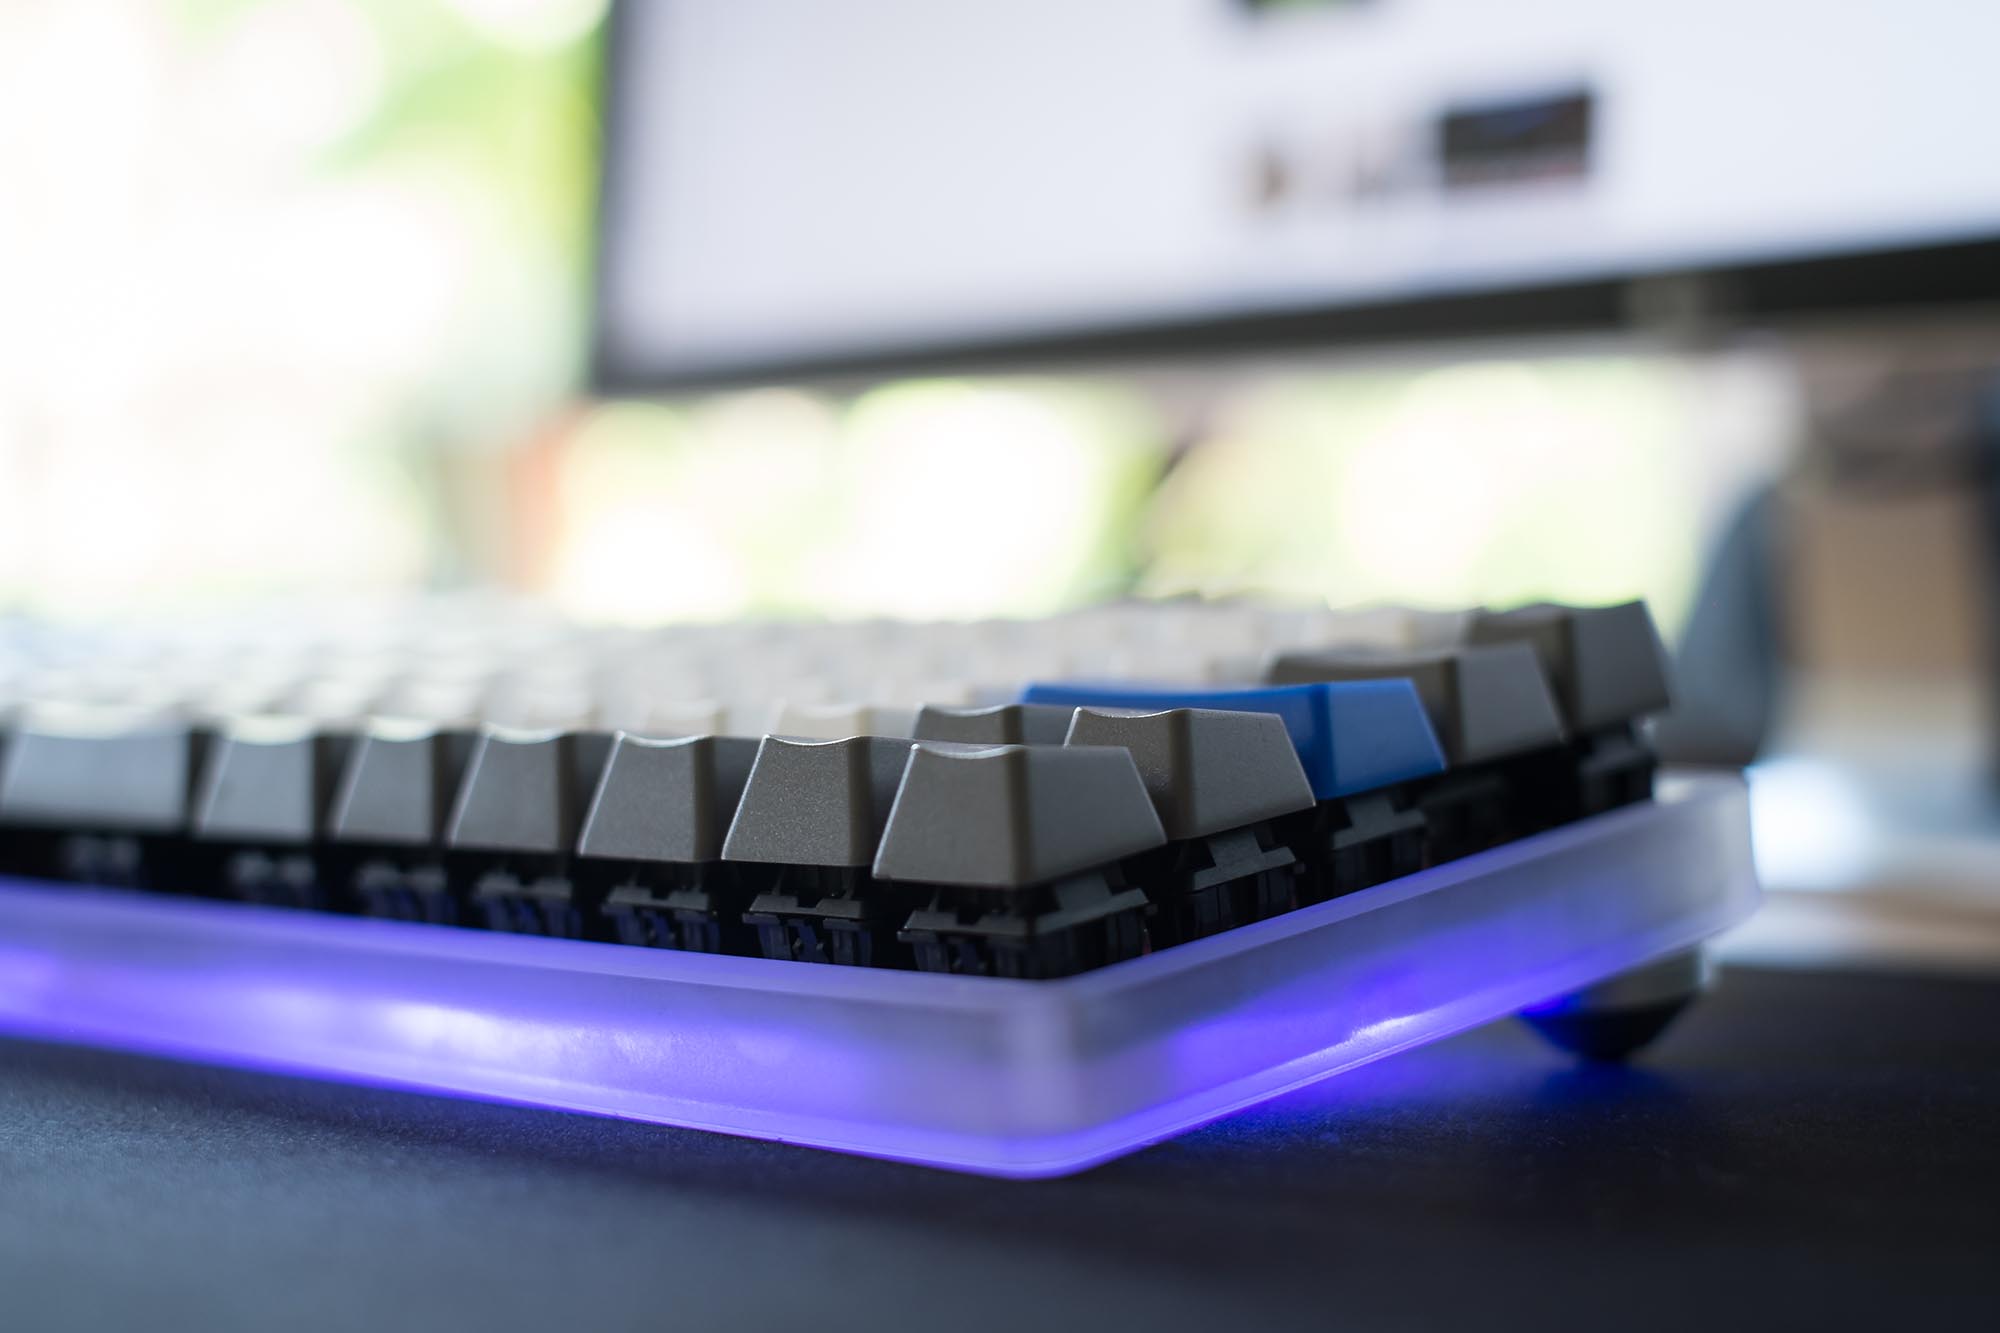 Front angle view of keyboard with acrylic case and purple glowing LEDs